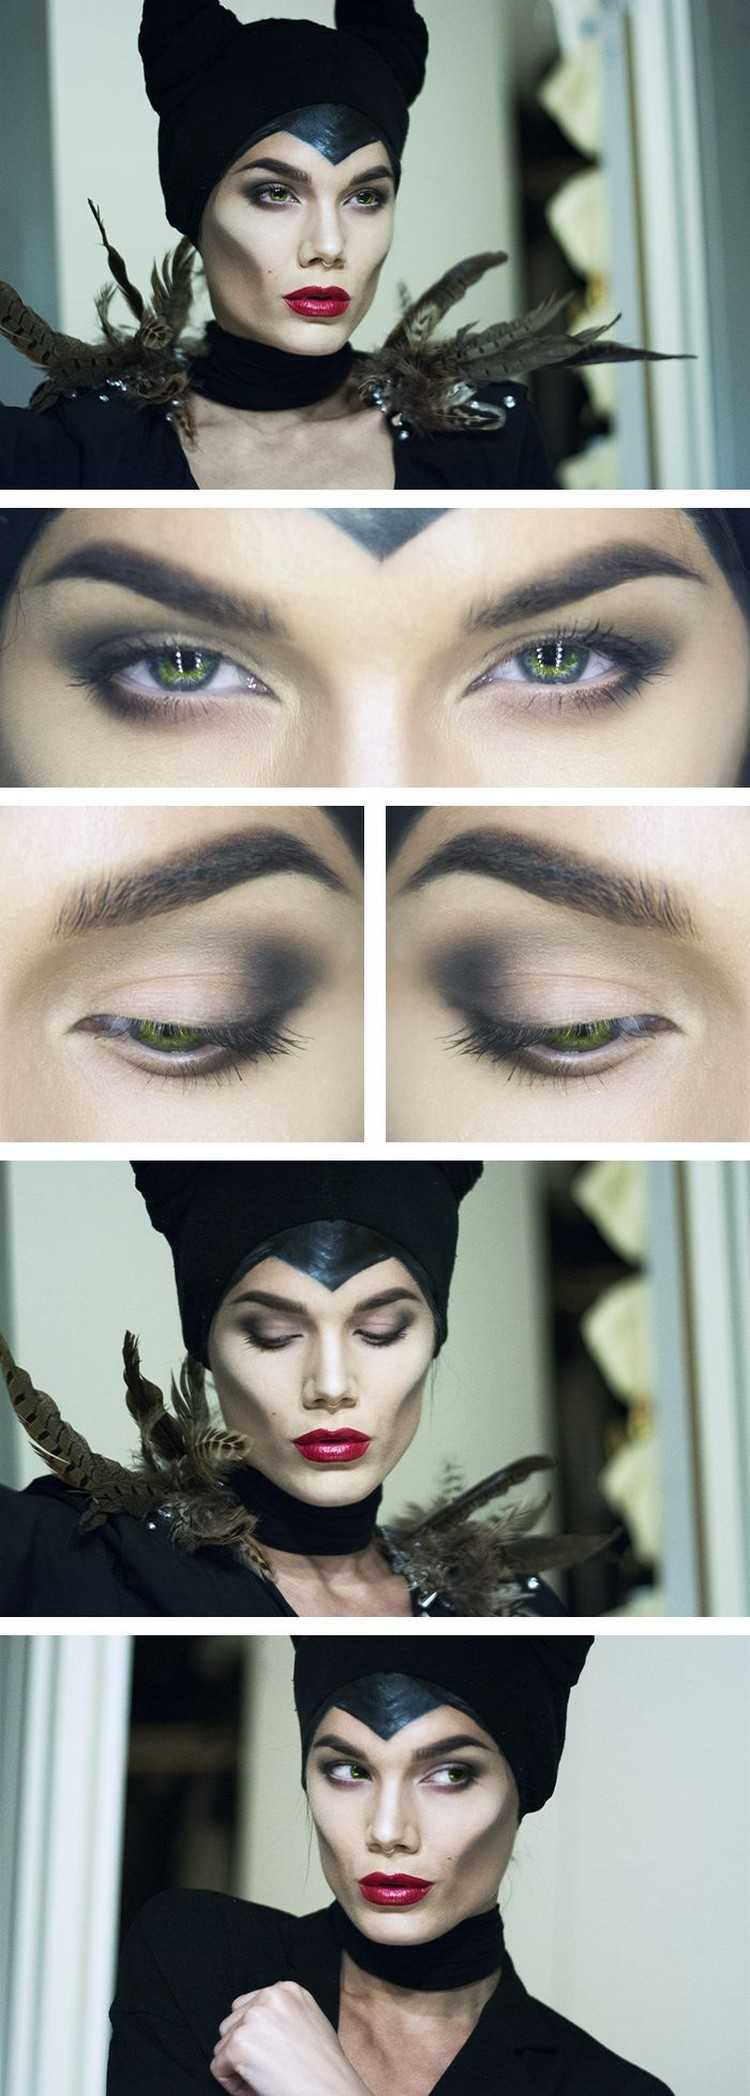 maquillage-halloween-sorcieres-yeux-plumes